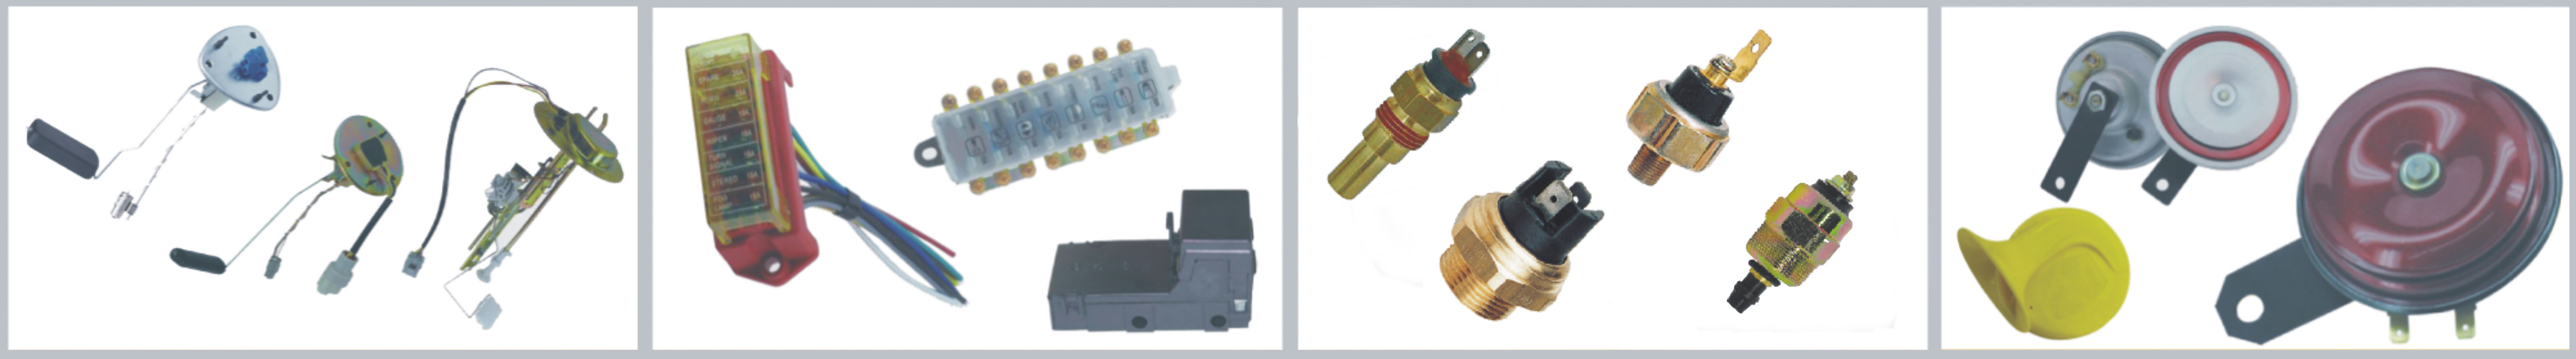 Zhongshen supplies various product lines such as fuel-tank floats, fuse boxes, switches, horns etc.